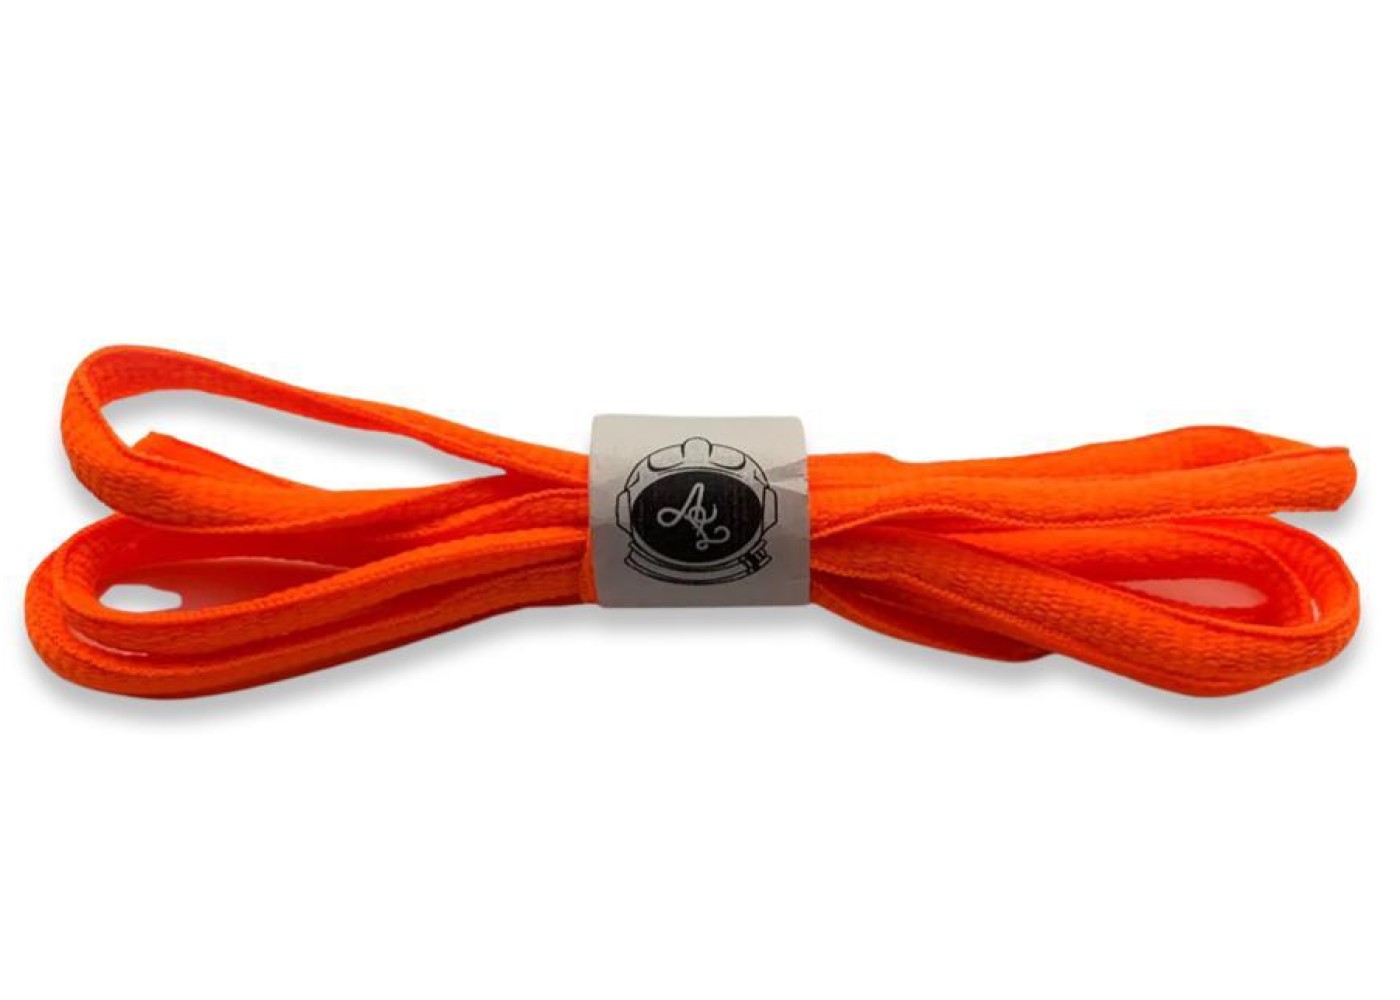 Astrolaces Oval Laces Enflame Orange